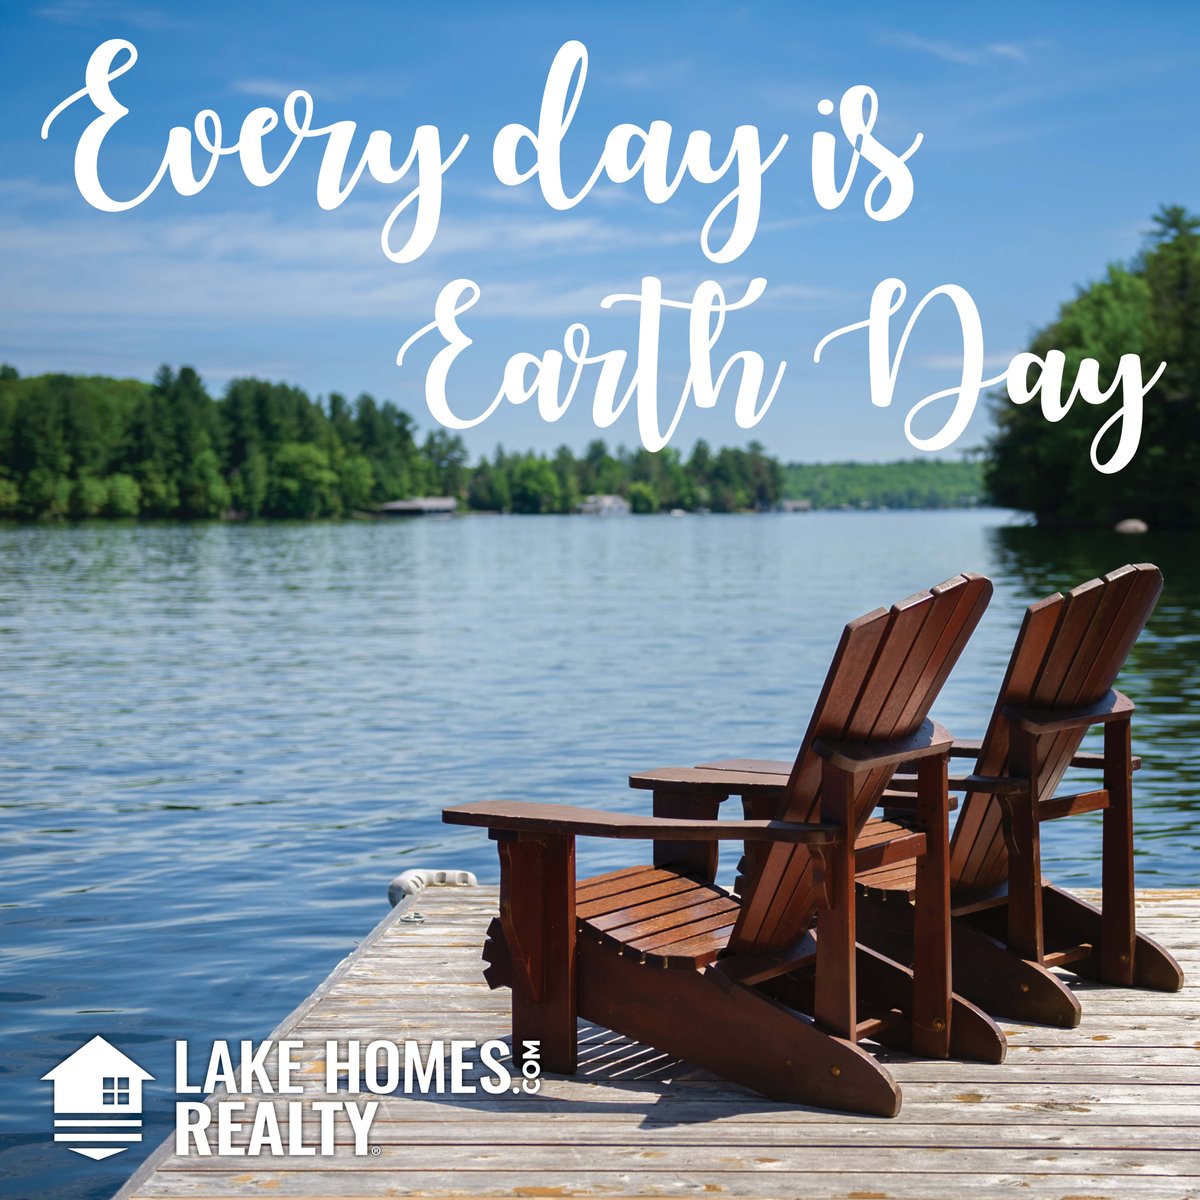 Celebrating the beauty of the lake this Earth Day! Let's protect what we love.

#LakeHomesRealty #LakeLife #LakeLifestyle #LakeLiving #LakeHouse #LakeVibes #LakeFun #LakeLove #Lakeside #LifeontheLake #Outdoorliving #lakelove #kayak #canoe #onthewater #lifeonthelake #lake #lakes